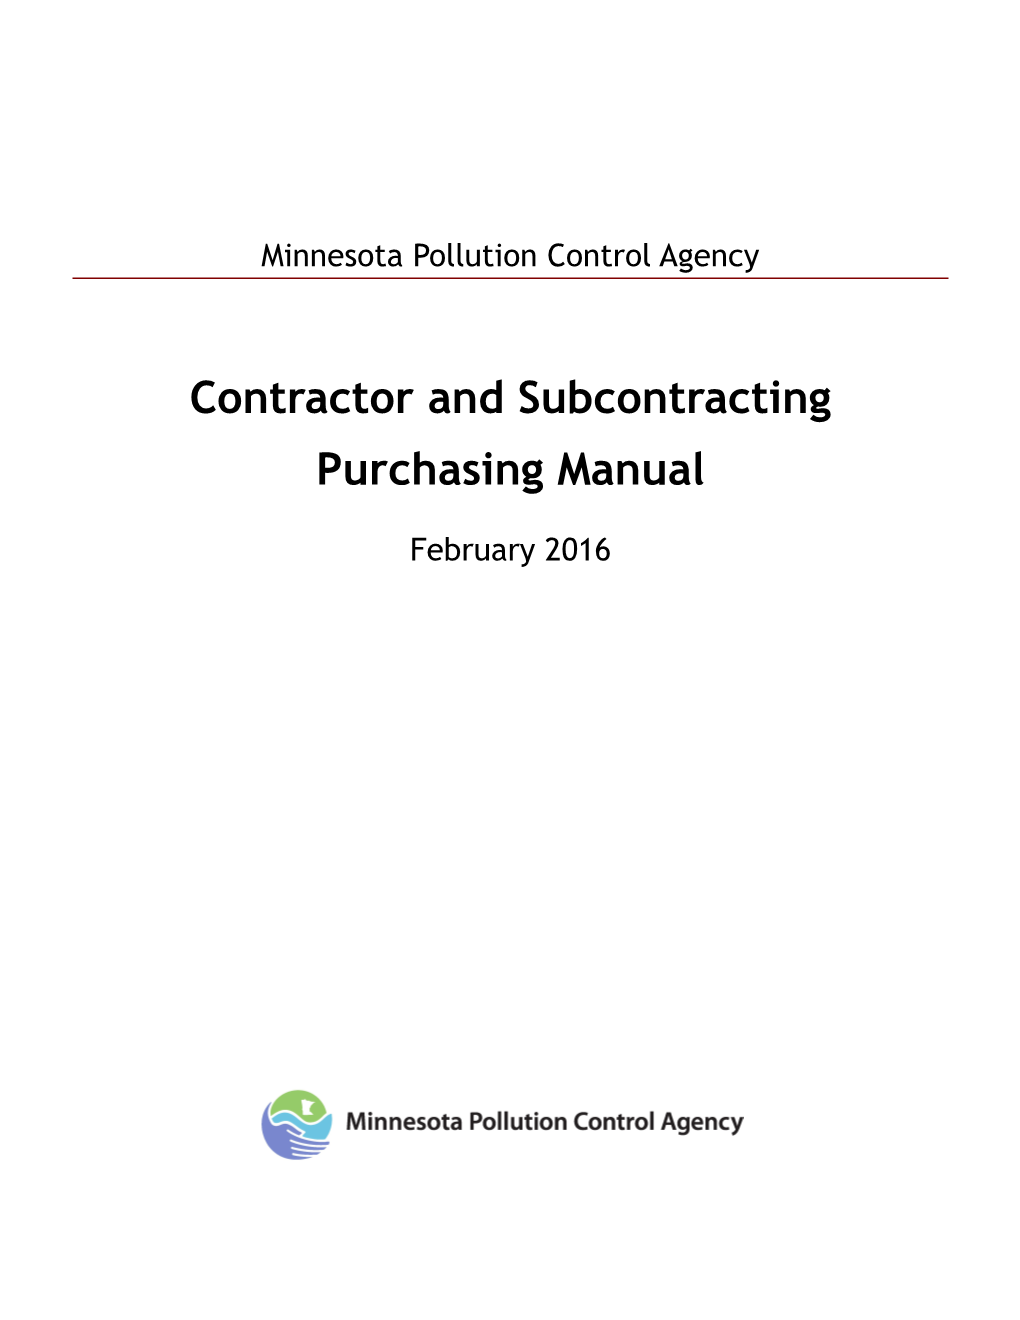 MPCA Contractor and Subcontracting Purchasing Manual